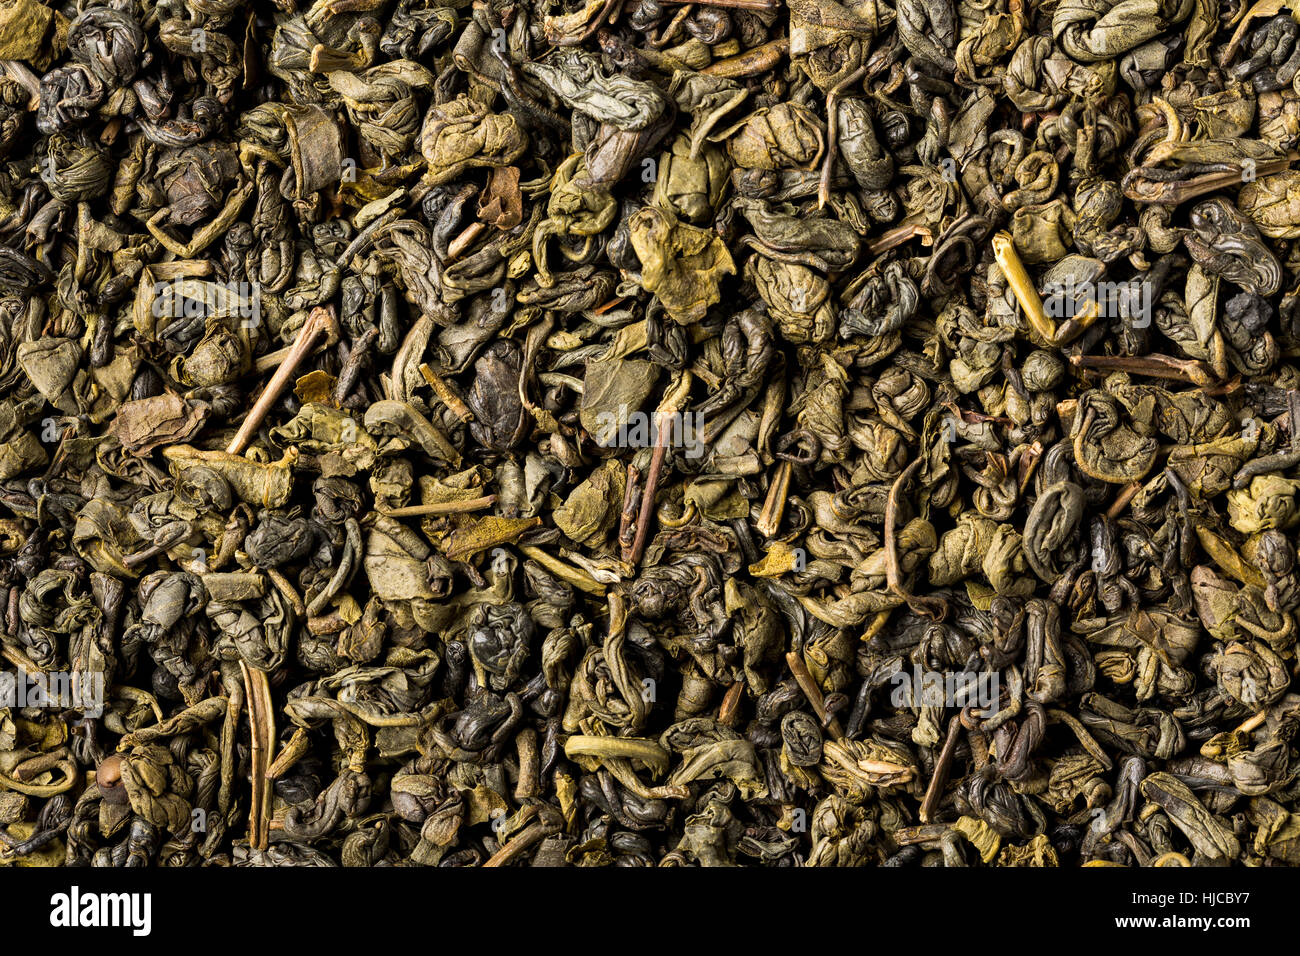 Dried leaves of green chinese gunpowder tea, full frame, image backgrounds. Stock Photo